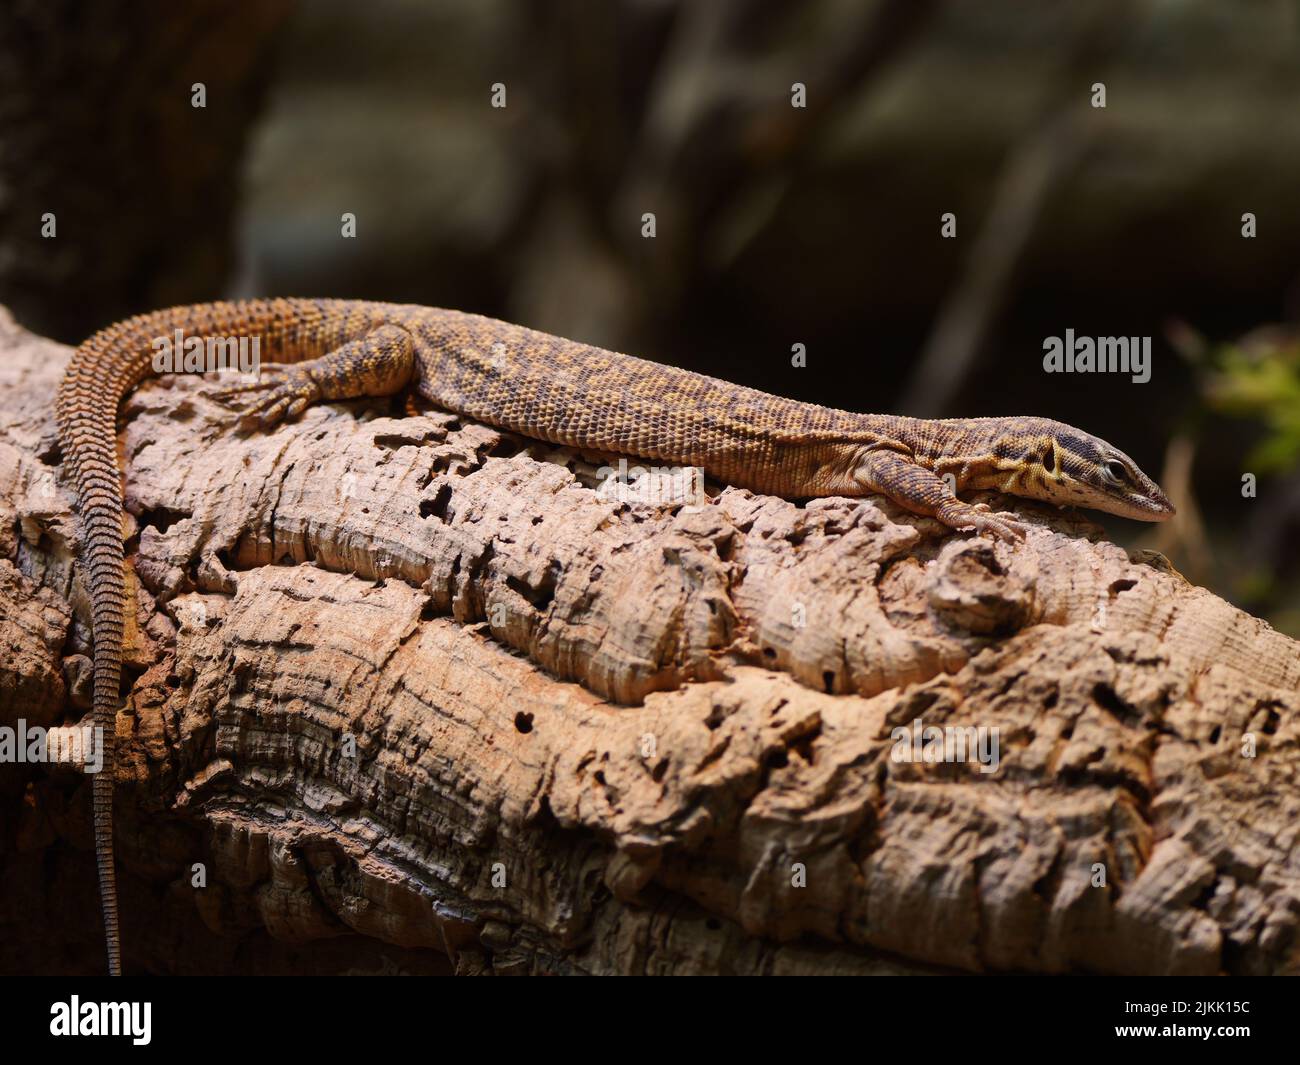 A closeup of a viviparous lizard with a long tail on a wooden log Stock Photo